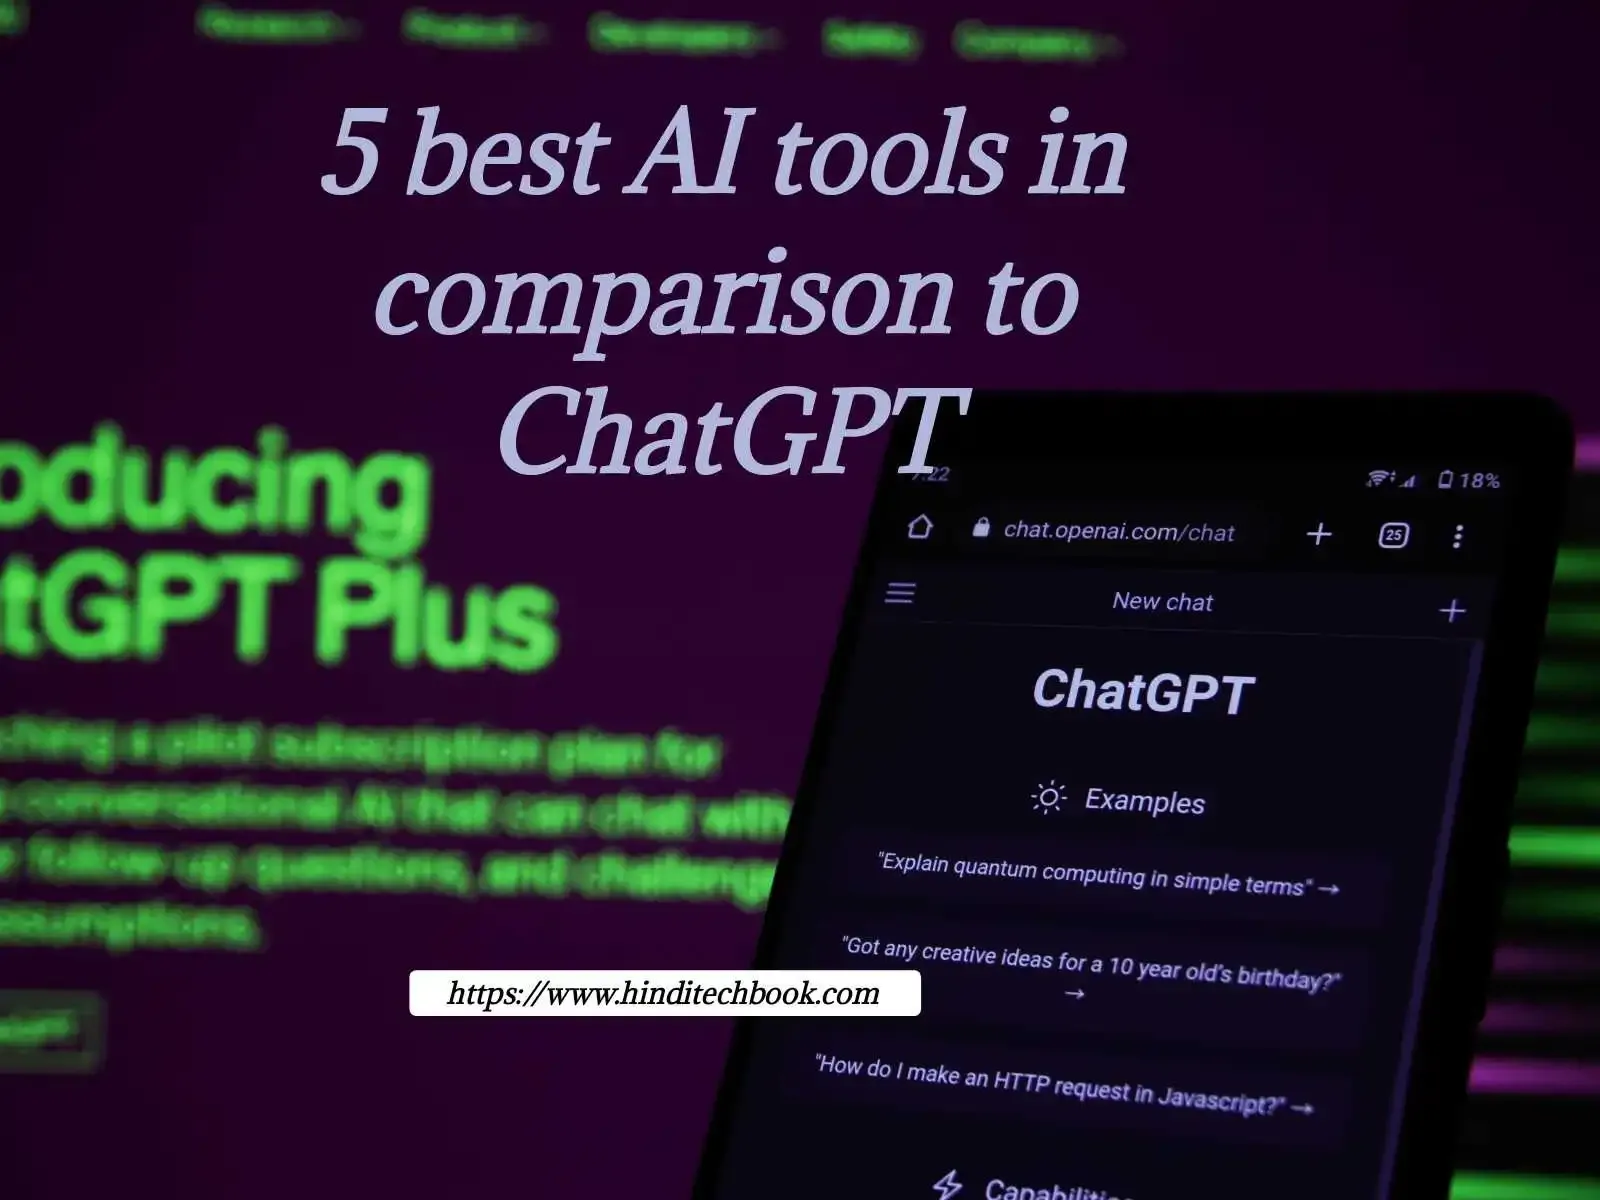 5 best AI tools in comparison to ChatGPT